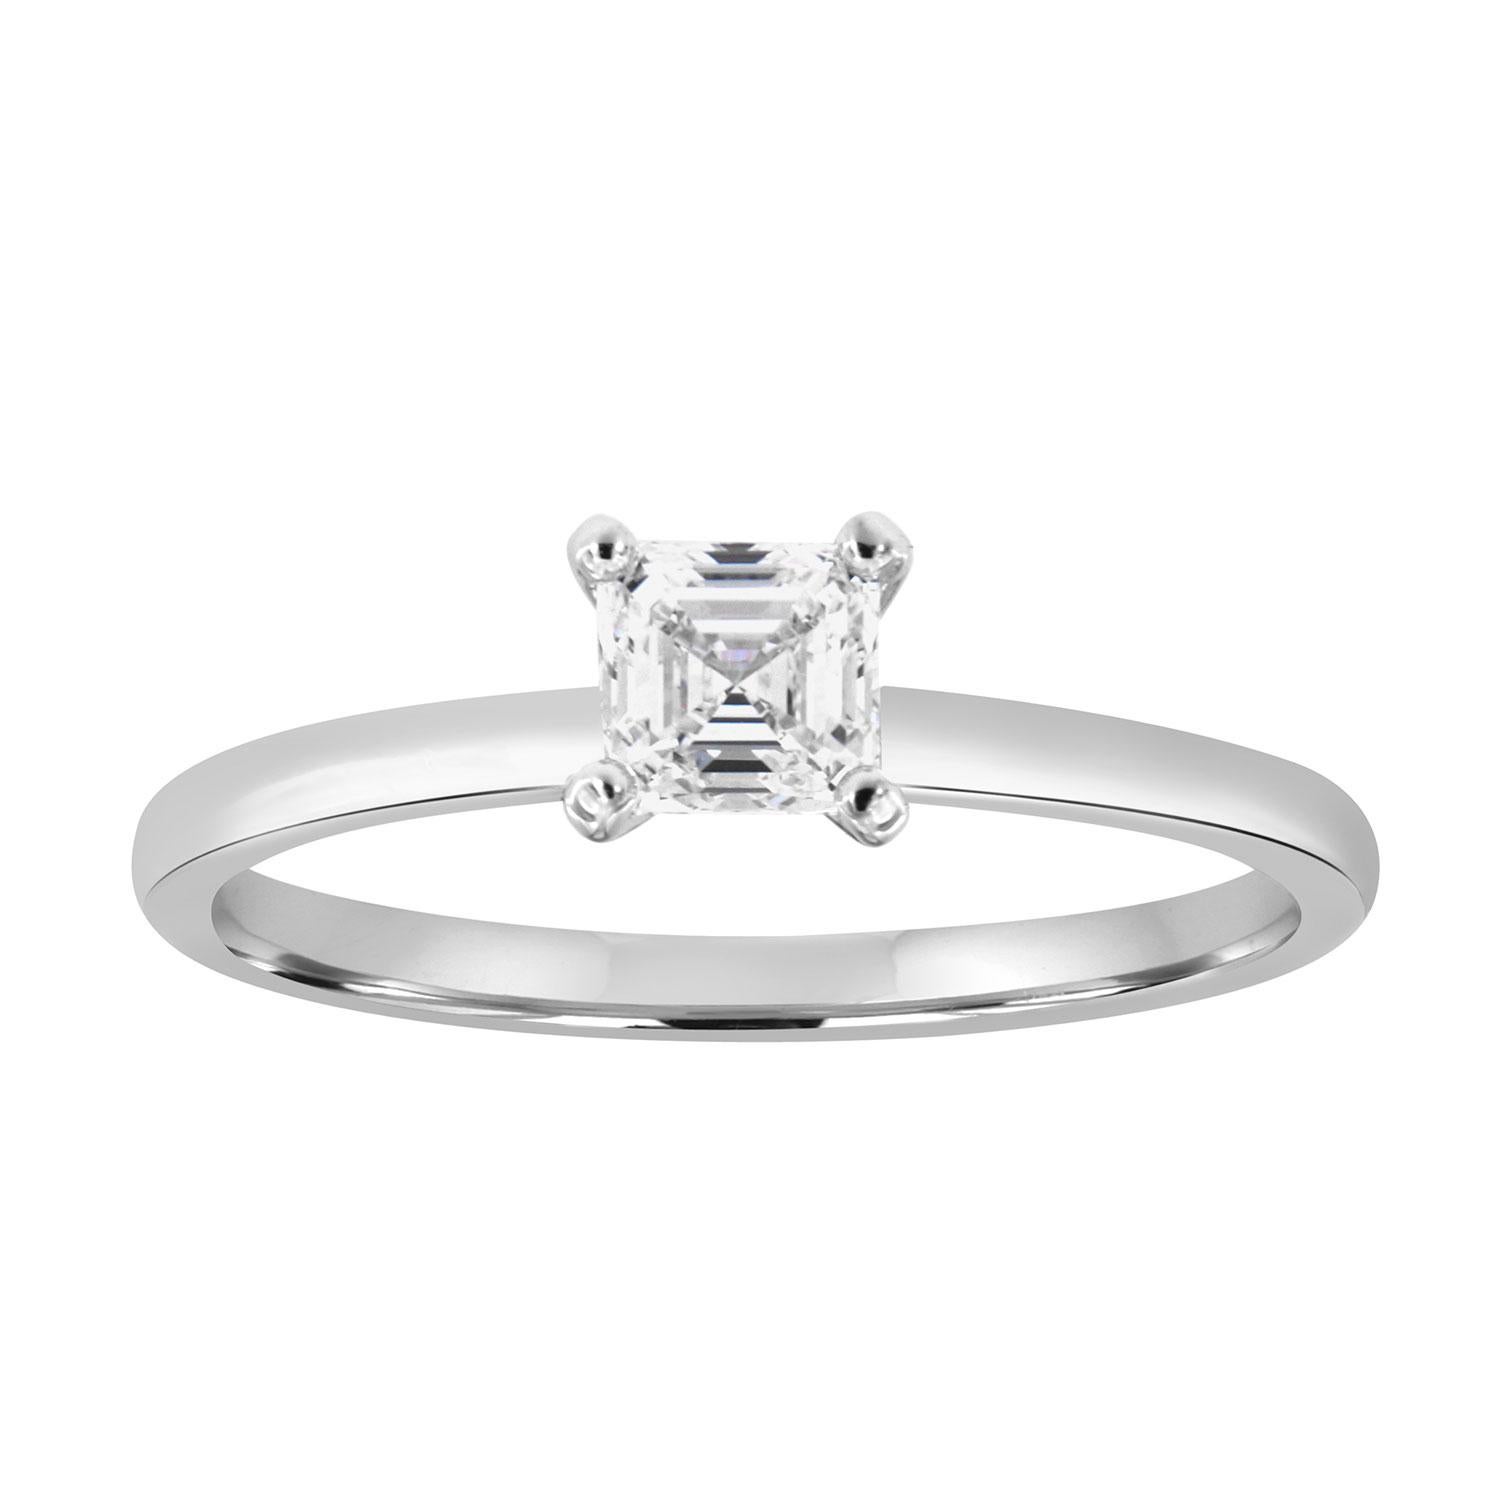 This 14k white gold solitaire features a perfect 0.60 carat Asscher cut natural diamond GIA certificate 2211602756 four (4) prong set on a 2MM wide comfort fit band. The perfectly matched band contains twenty-one (21) brilliant round diamonds 0.25